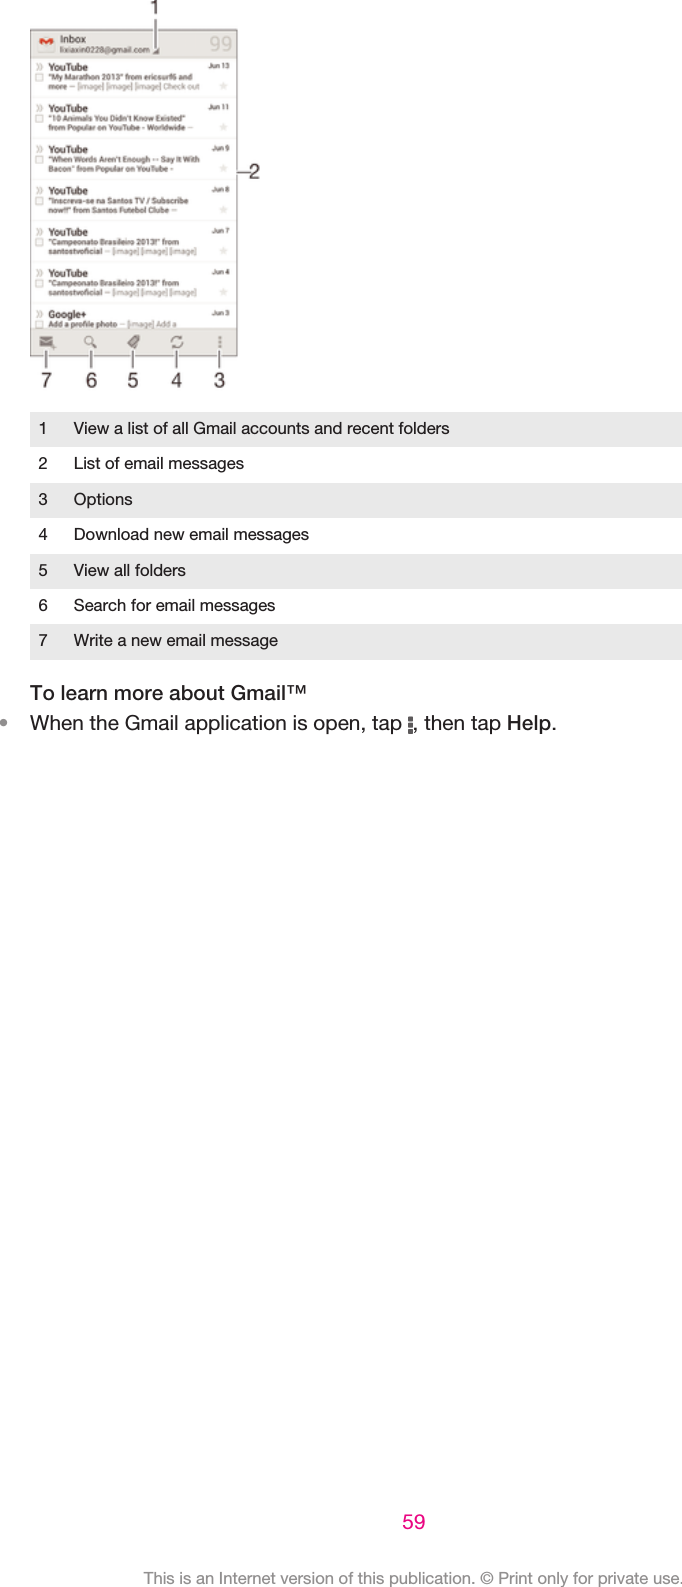 1 View a list of all Gmail accounts and recent folders2 List of email messages3 Options4 Download new email messages5 View all folders6 Search for email messages7 Write a new email messageTo learn more about Gmail™•When the Gmail application is open, tap  , then tap Help.59This is an Internet version of this publication. © Print only for private use.